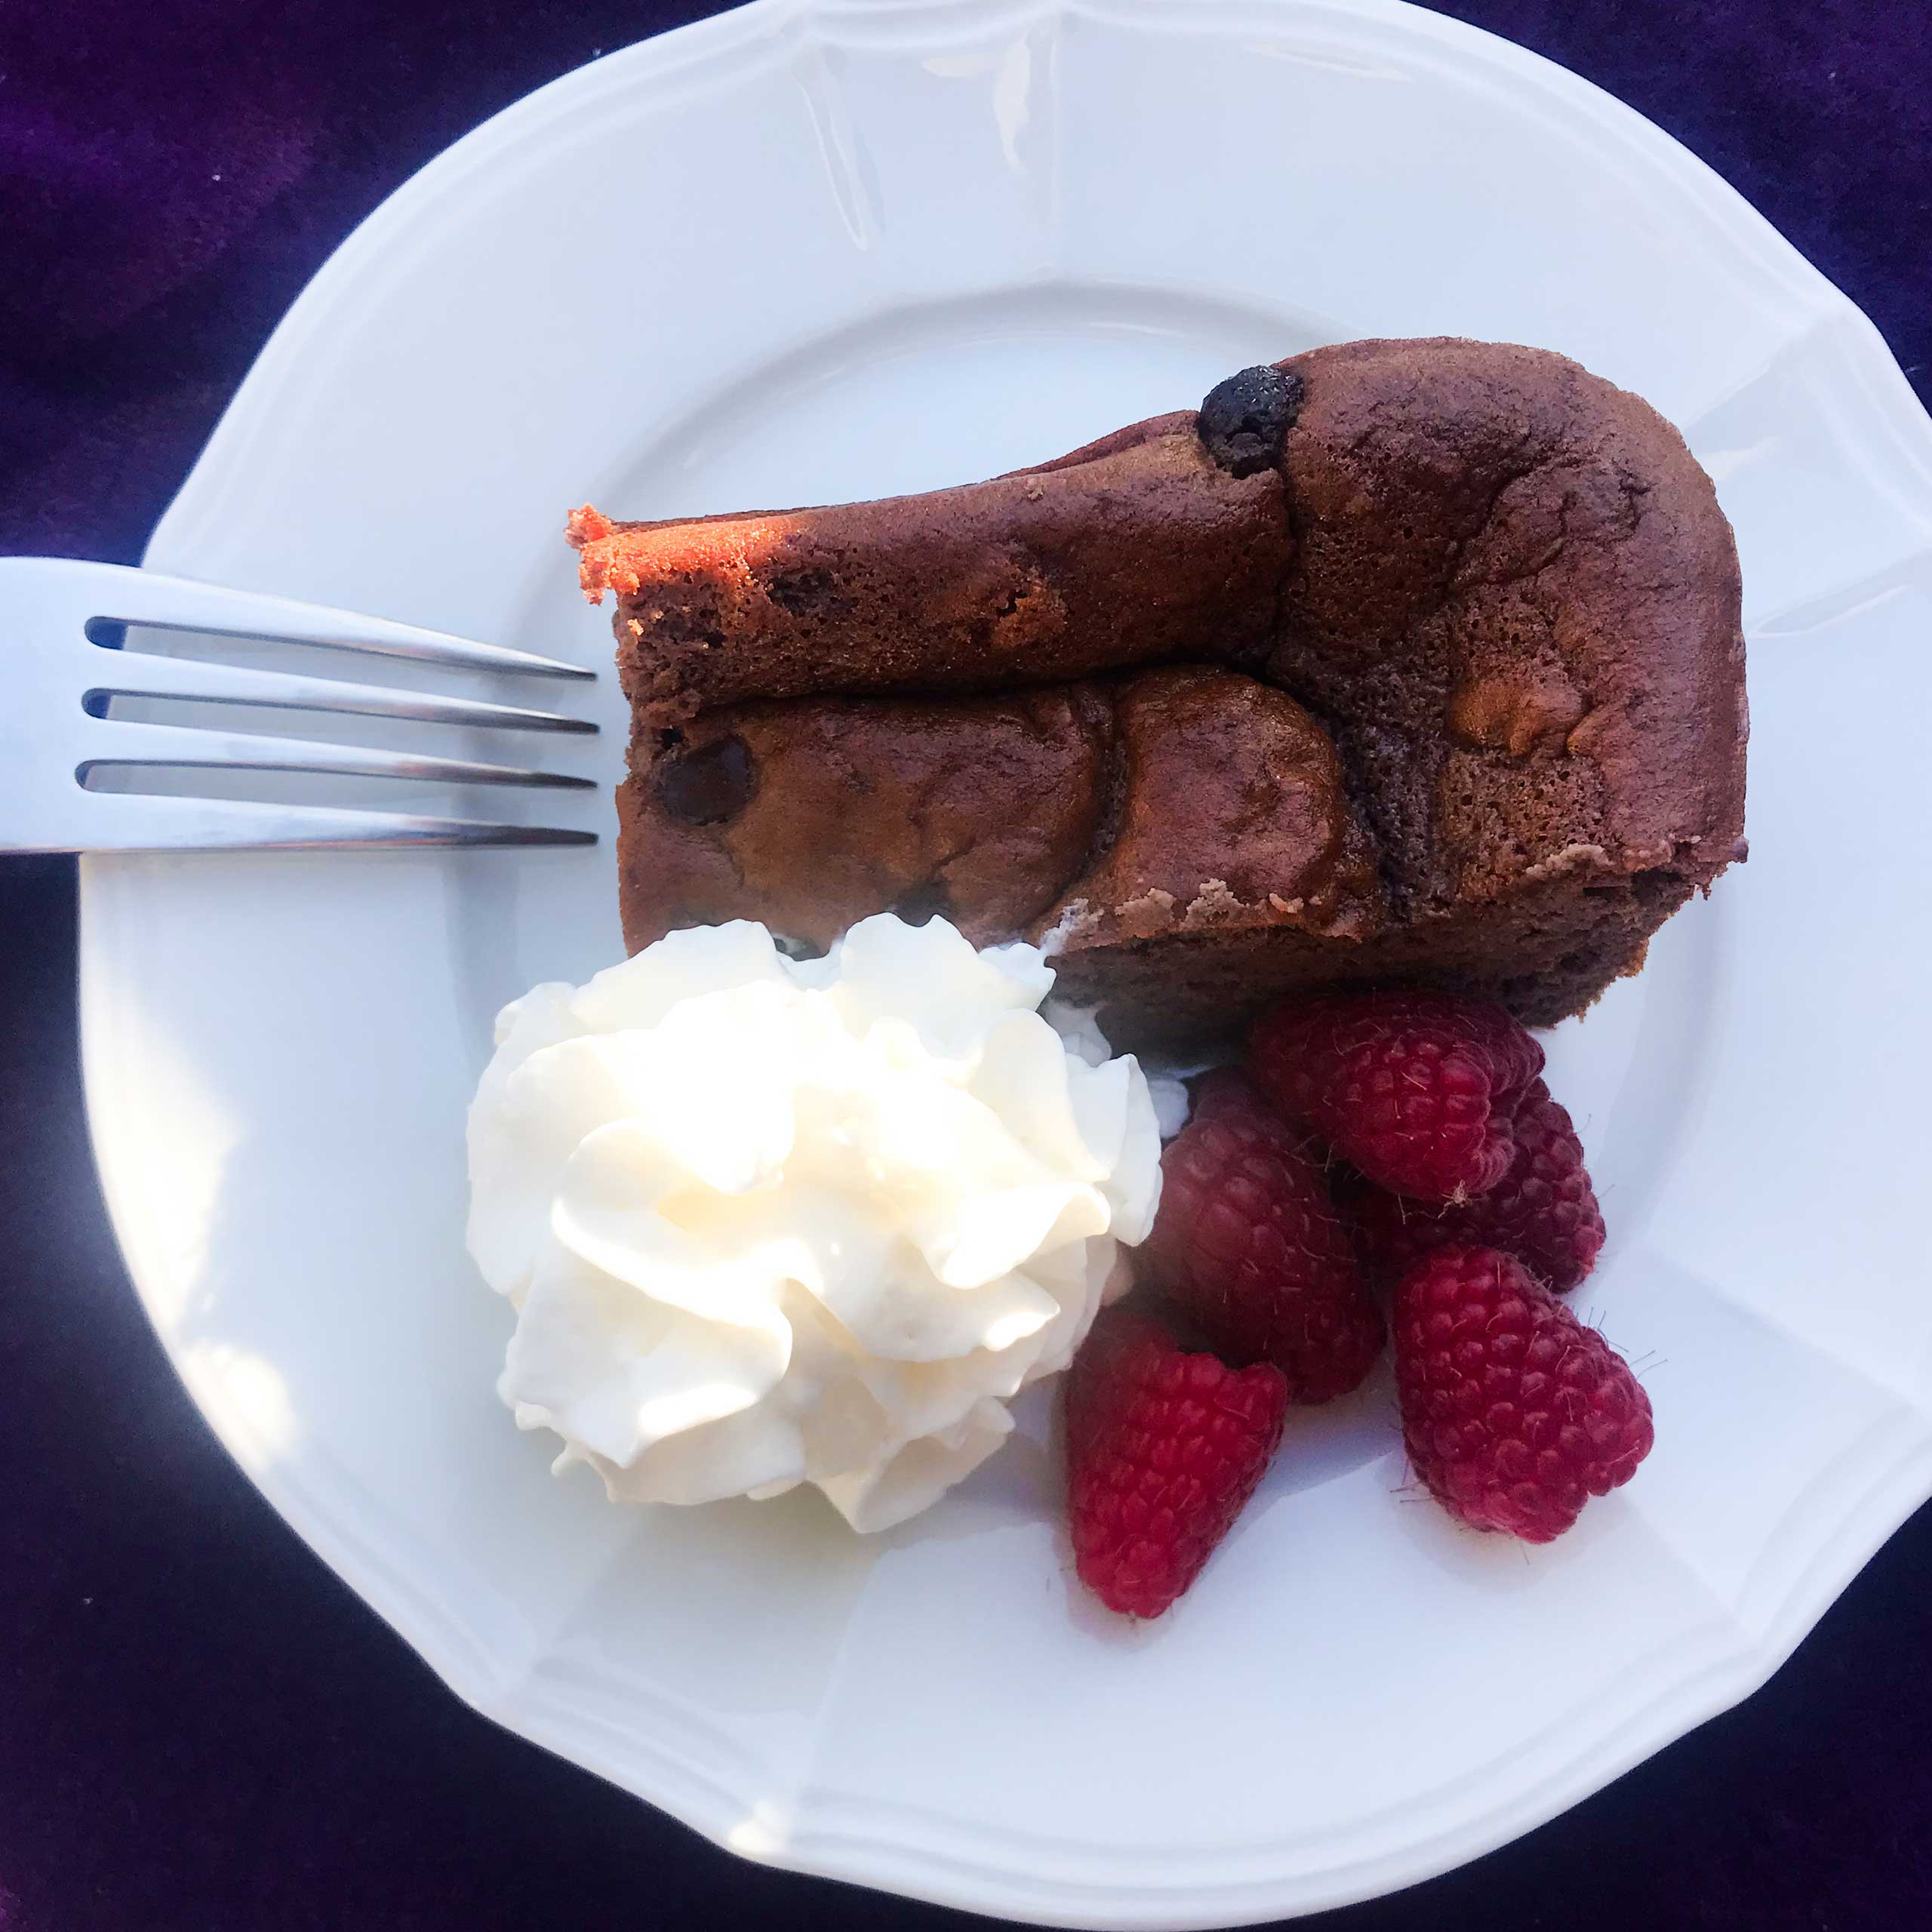 Chocolate protein bar on plate with whipped cream and berries.